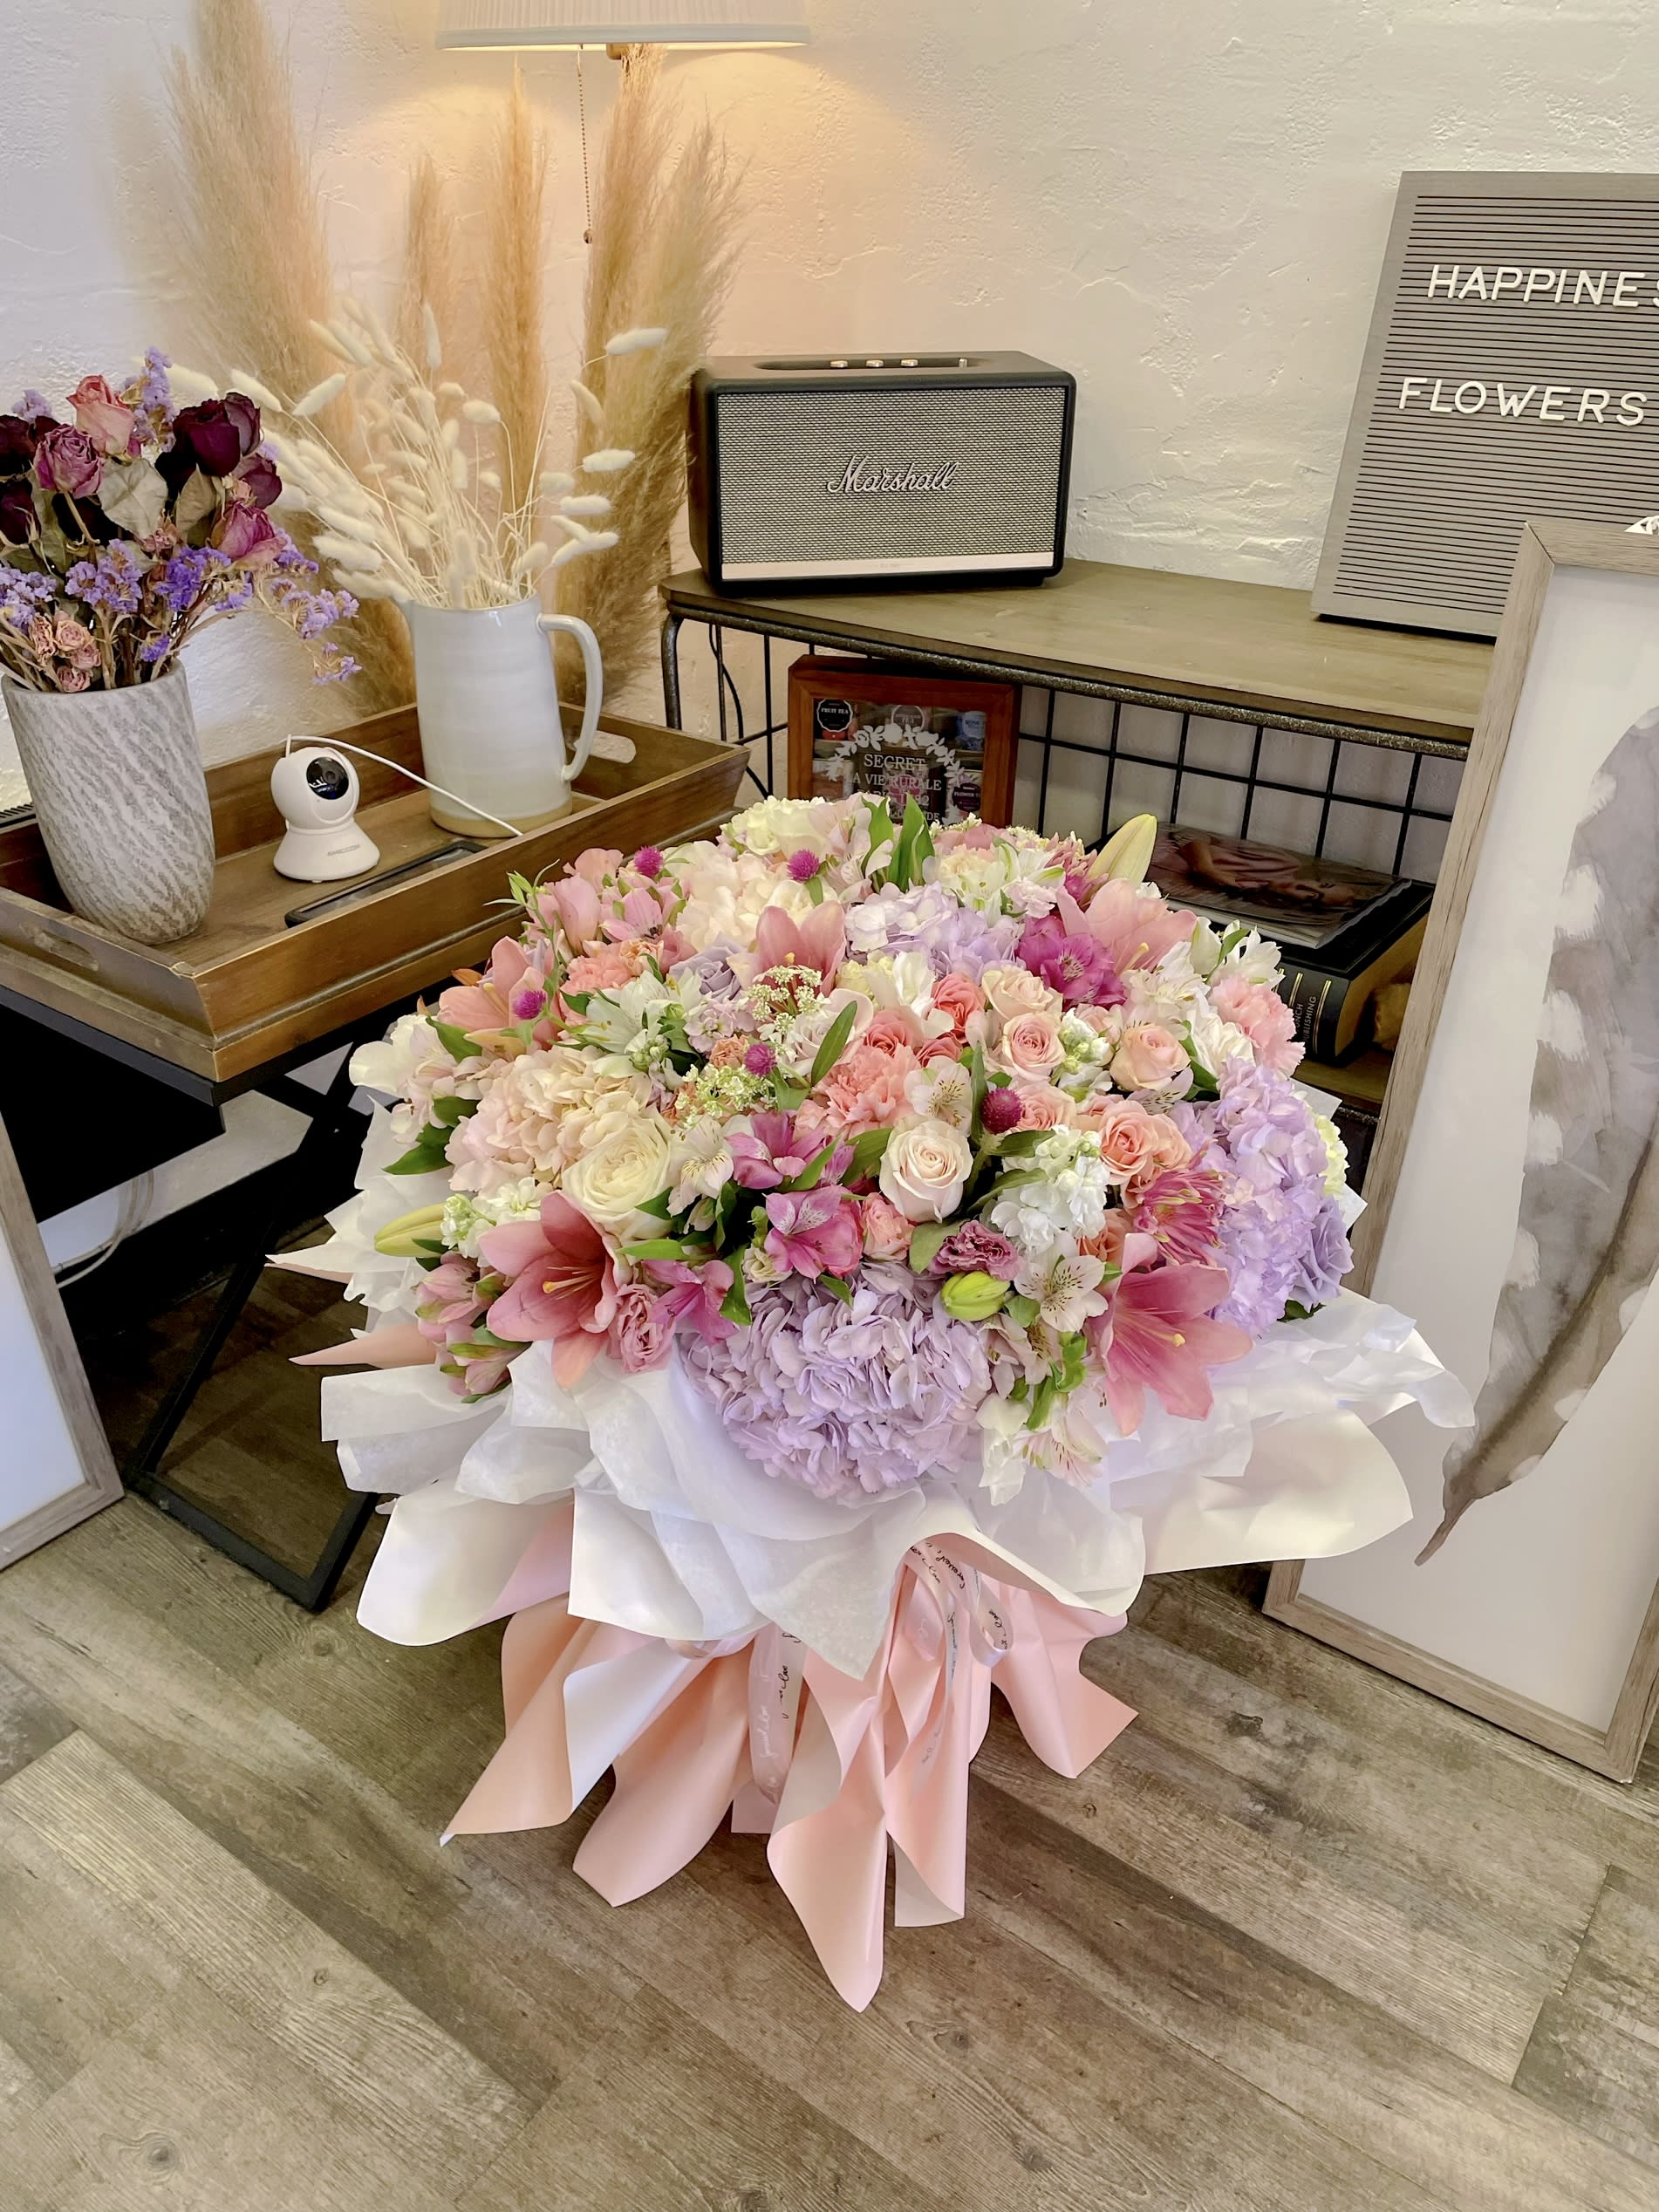 Flower Bouquet in Chino, CA | Happiness Flowers